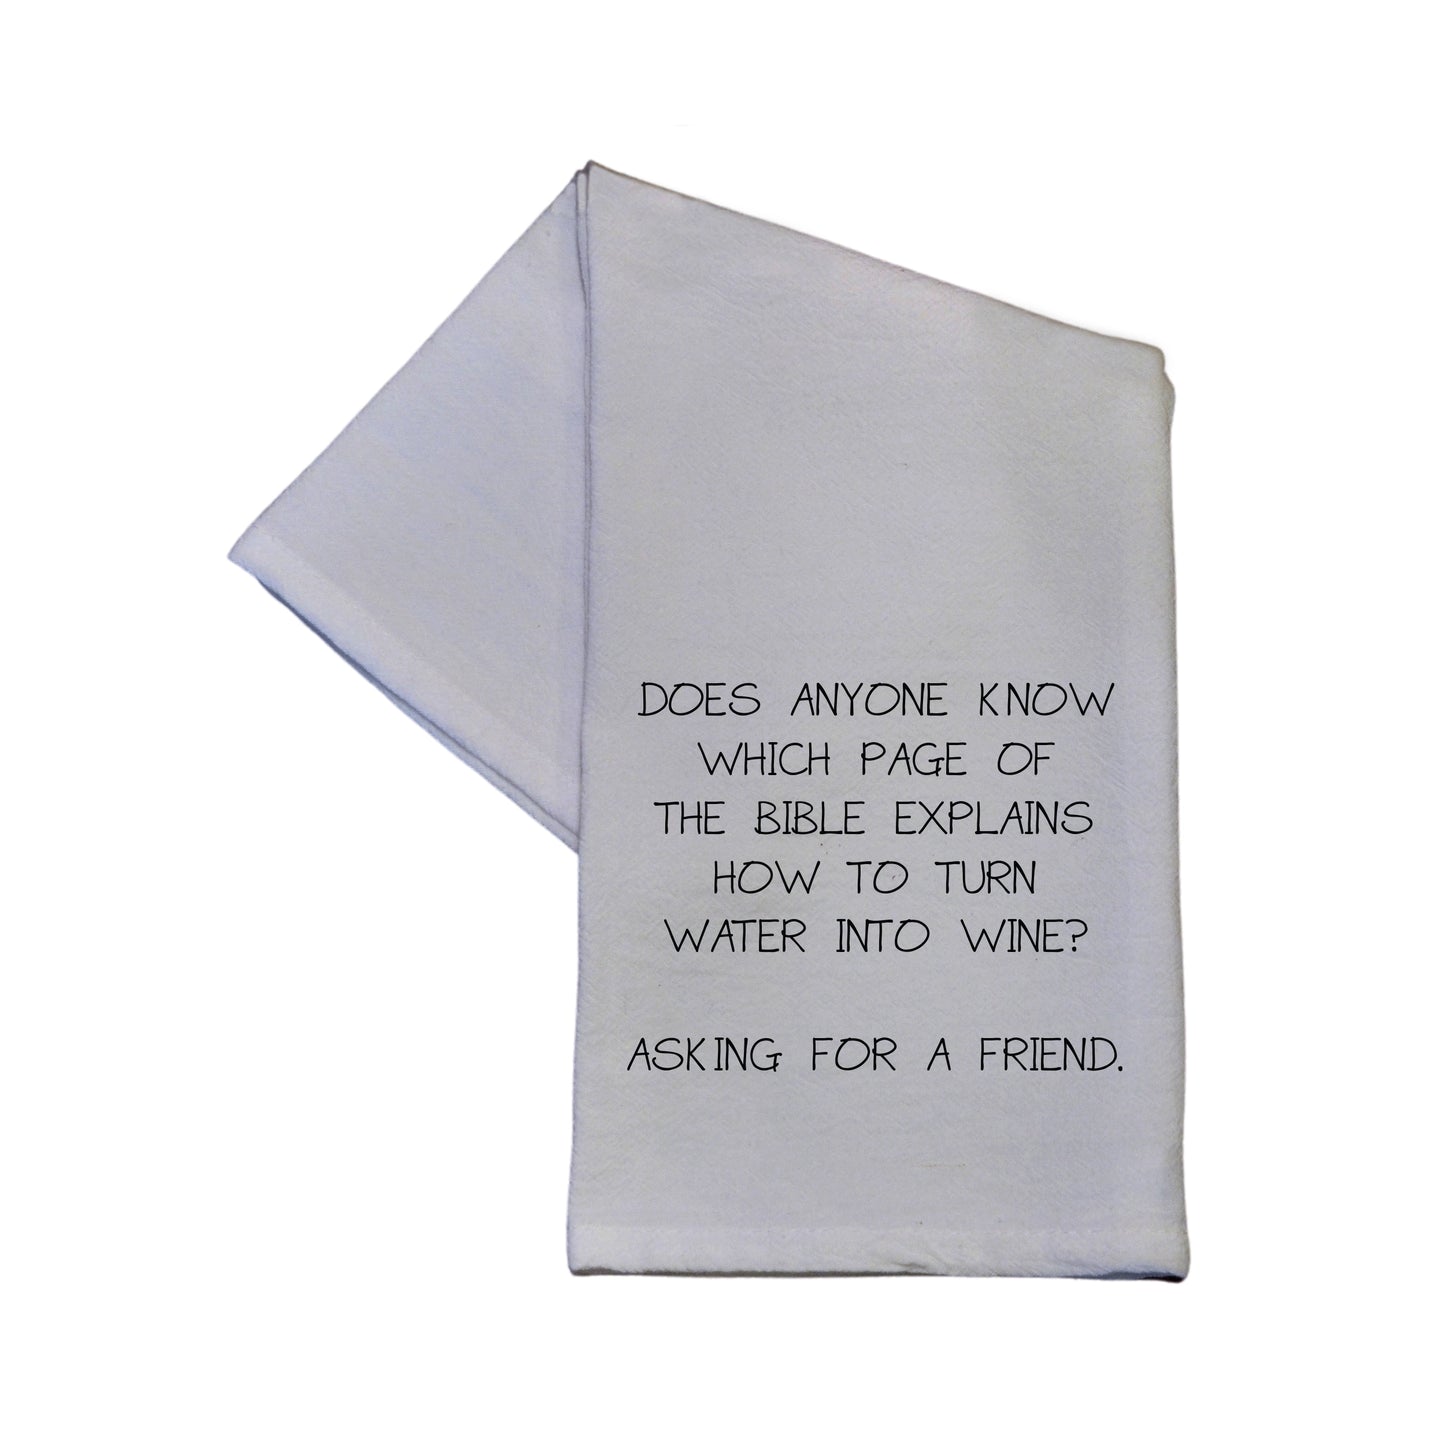 TEA TOWELS FOR DRINKING